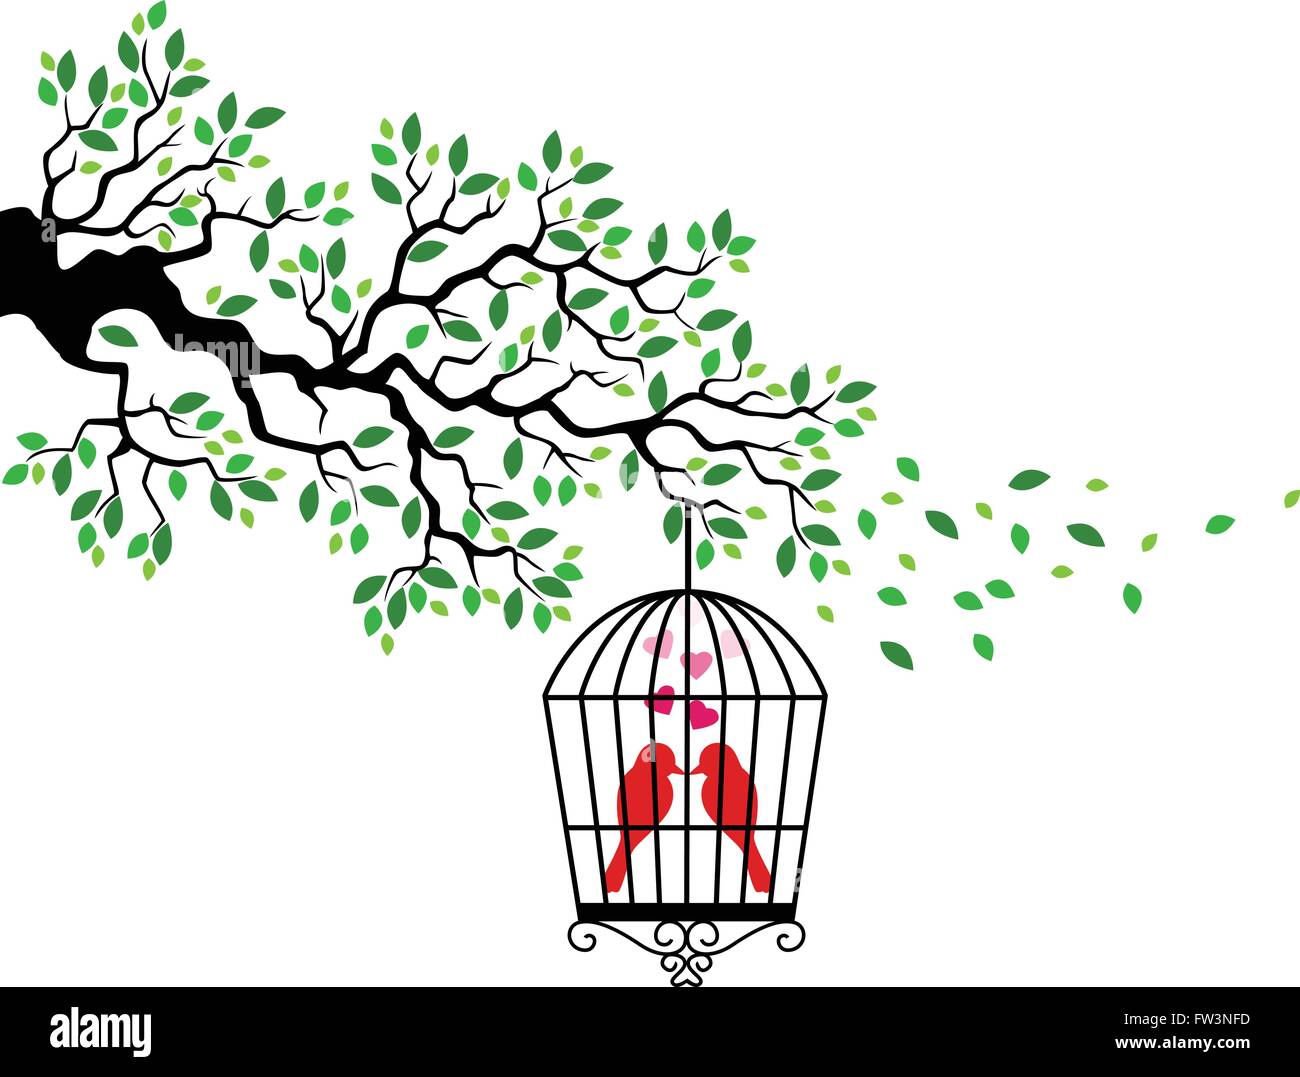 Tree silhouette with bird in a cage Stock Vector